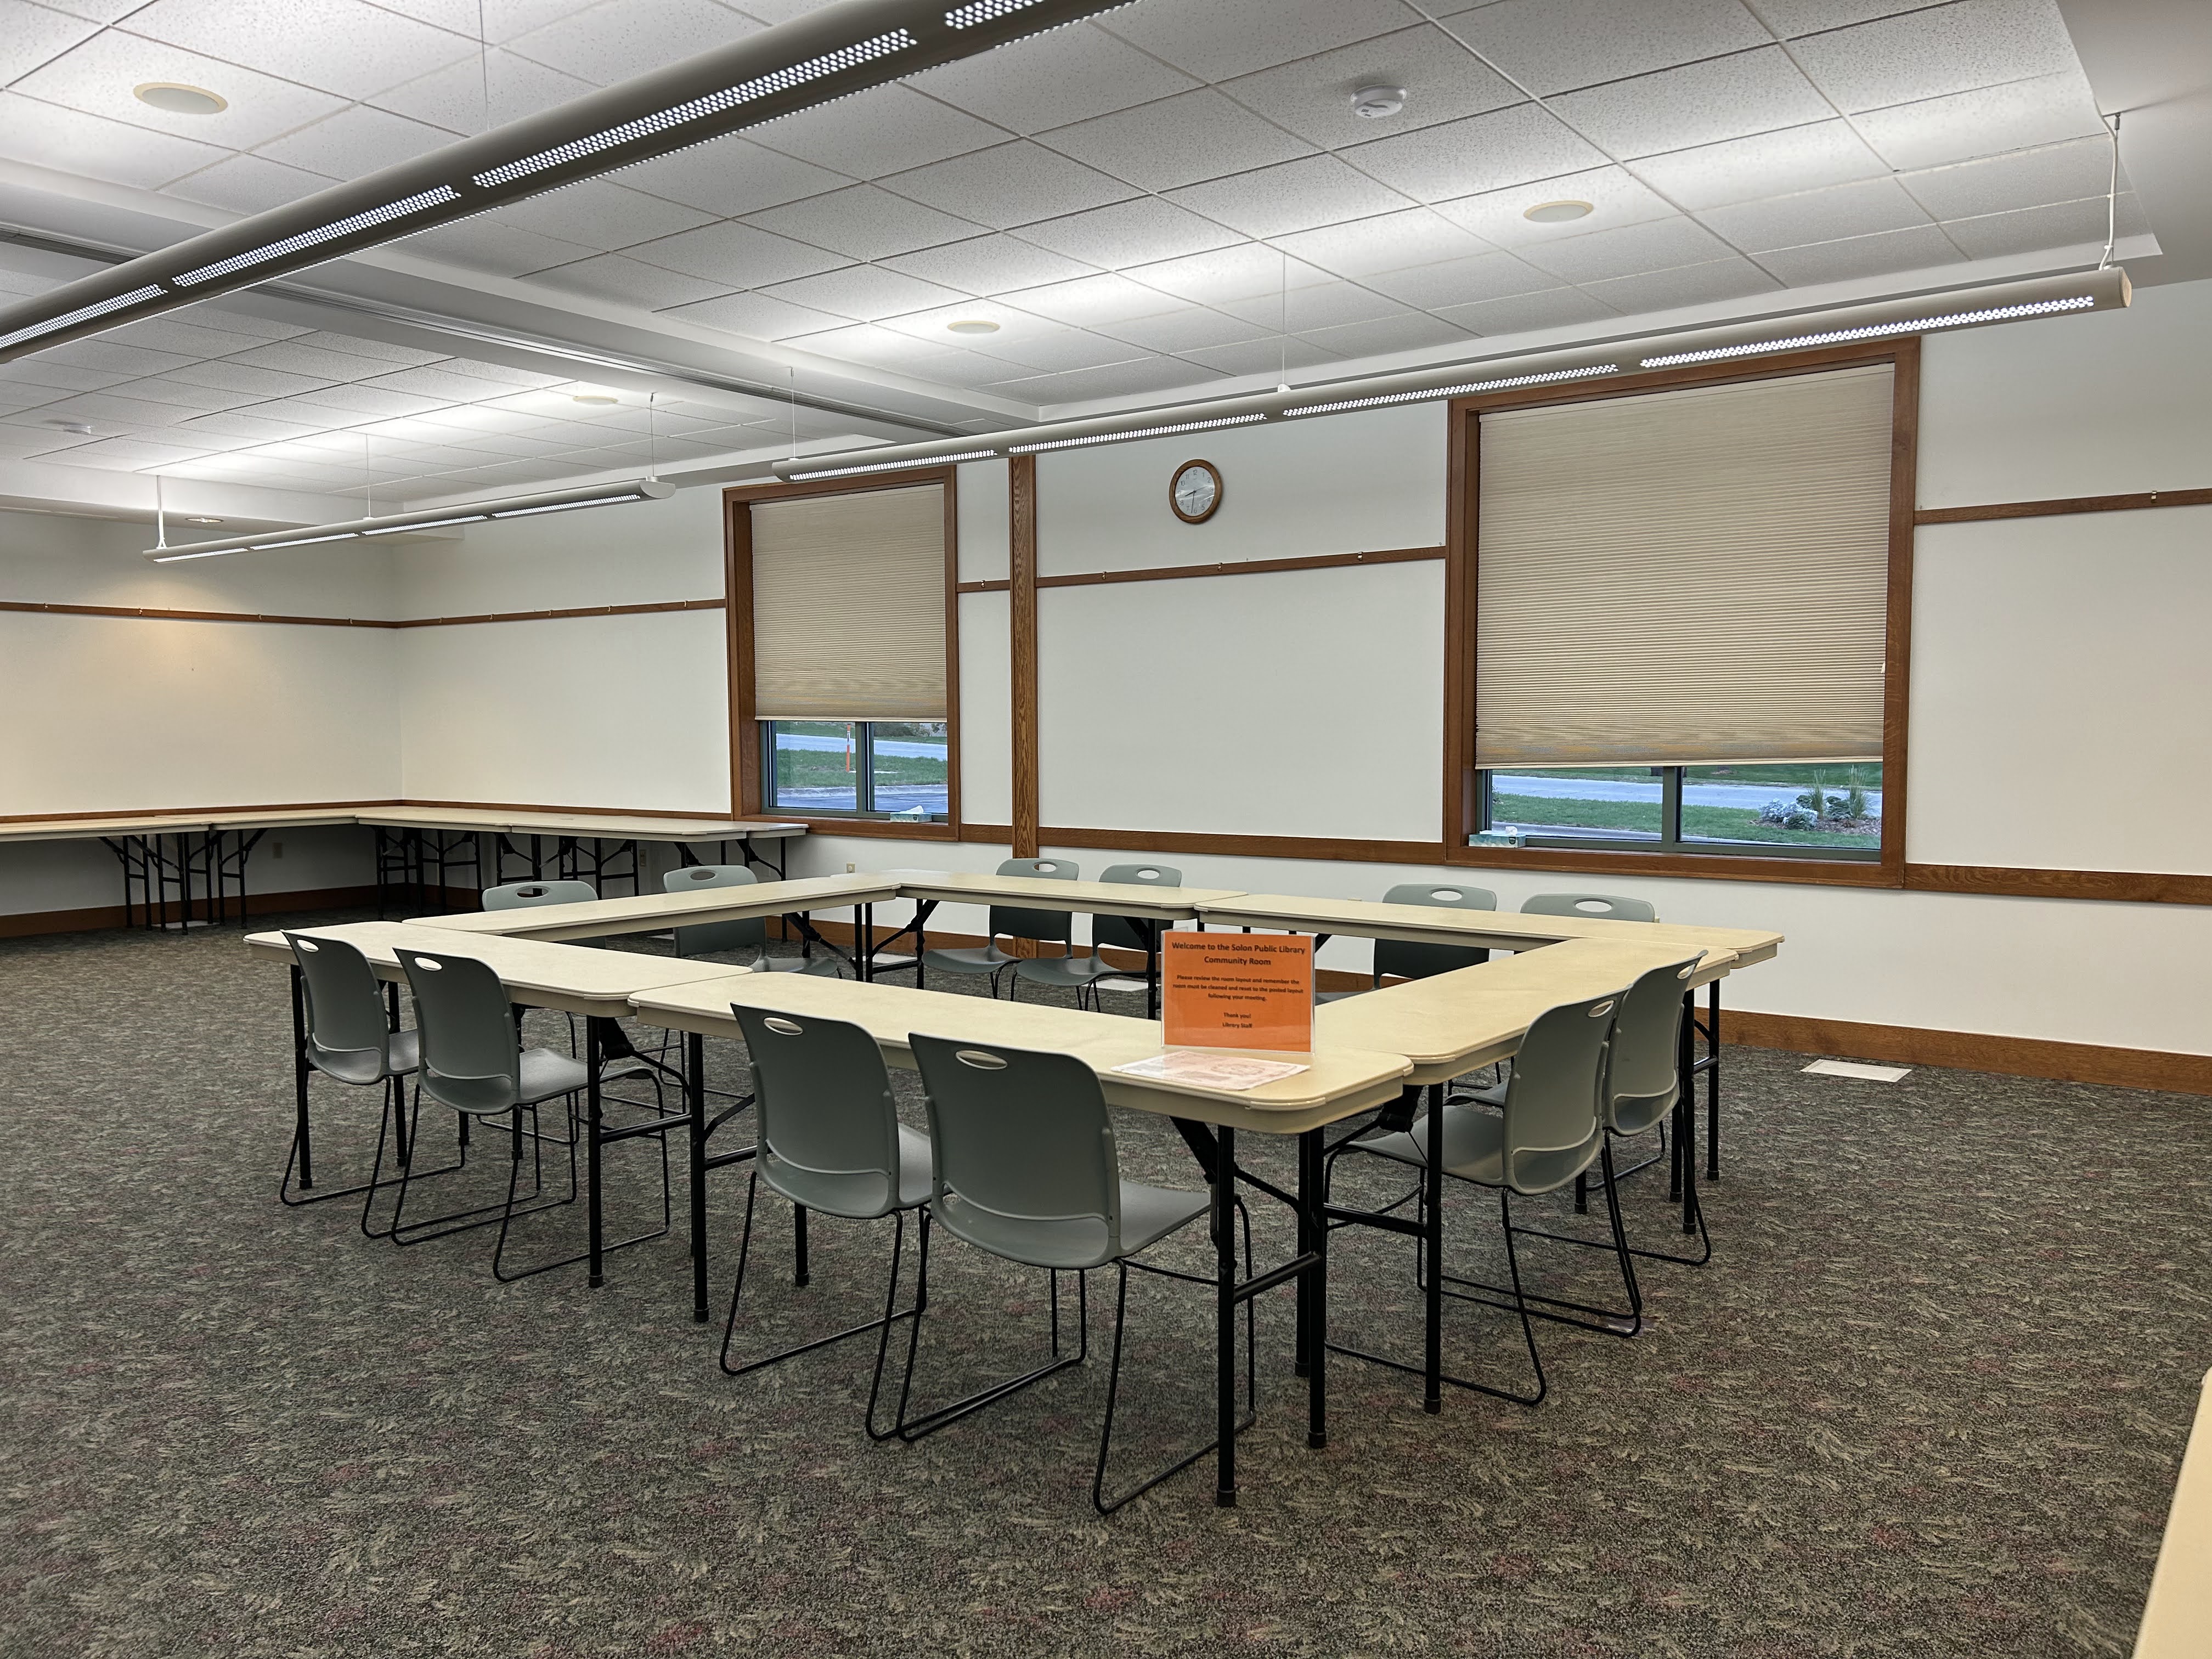 Photo of the community meeting room, standard layout with tables and chairs in a square.